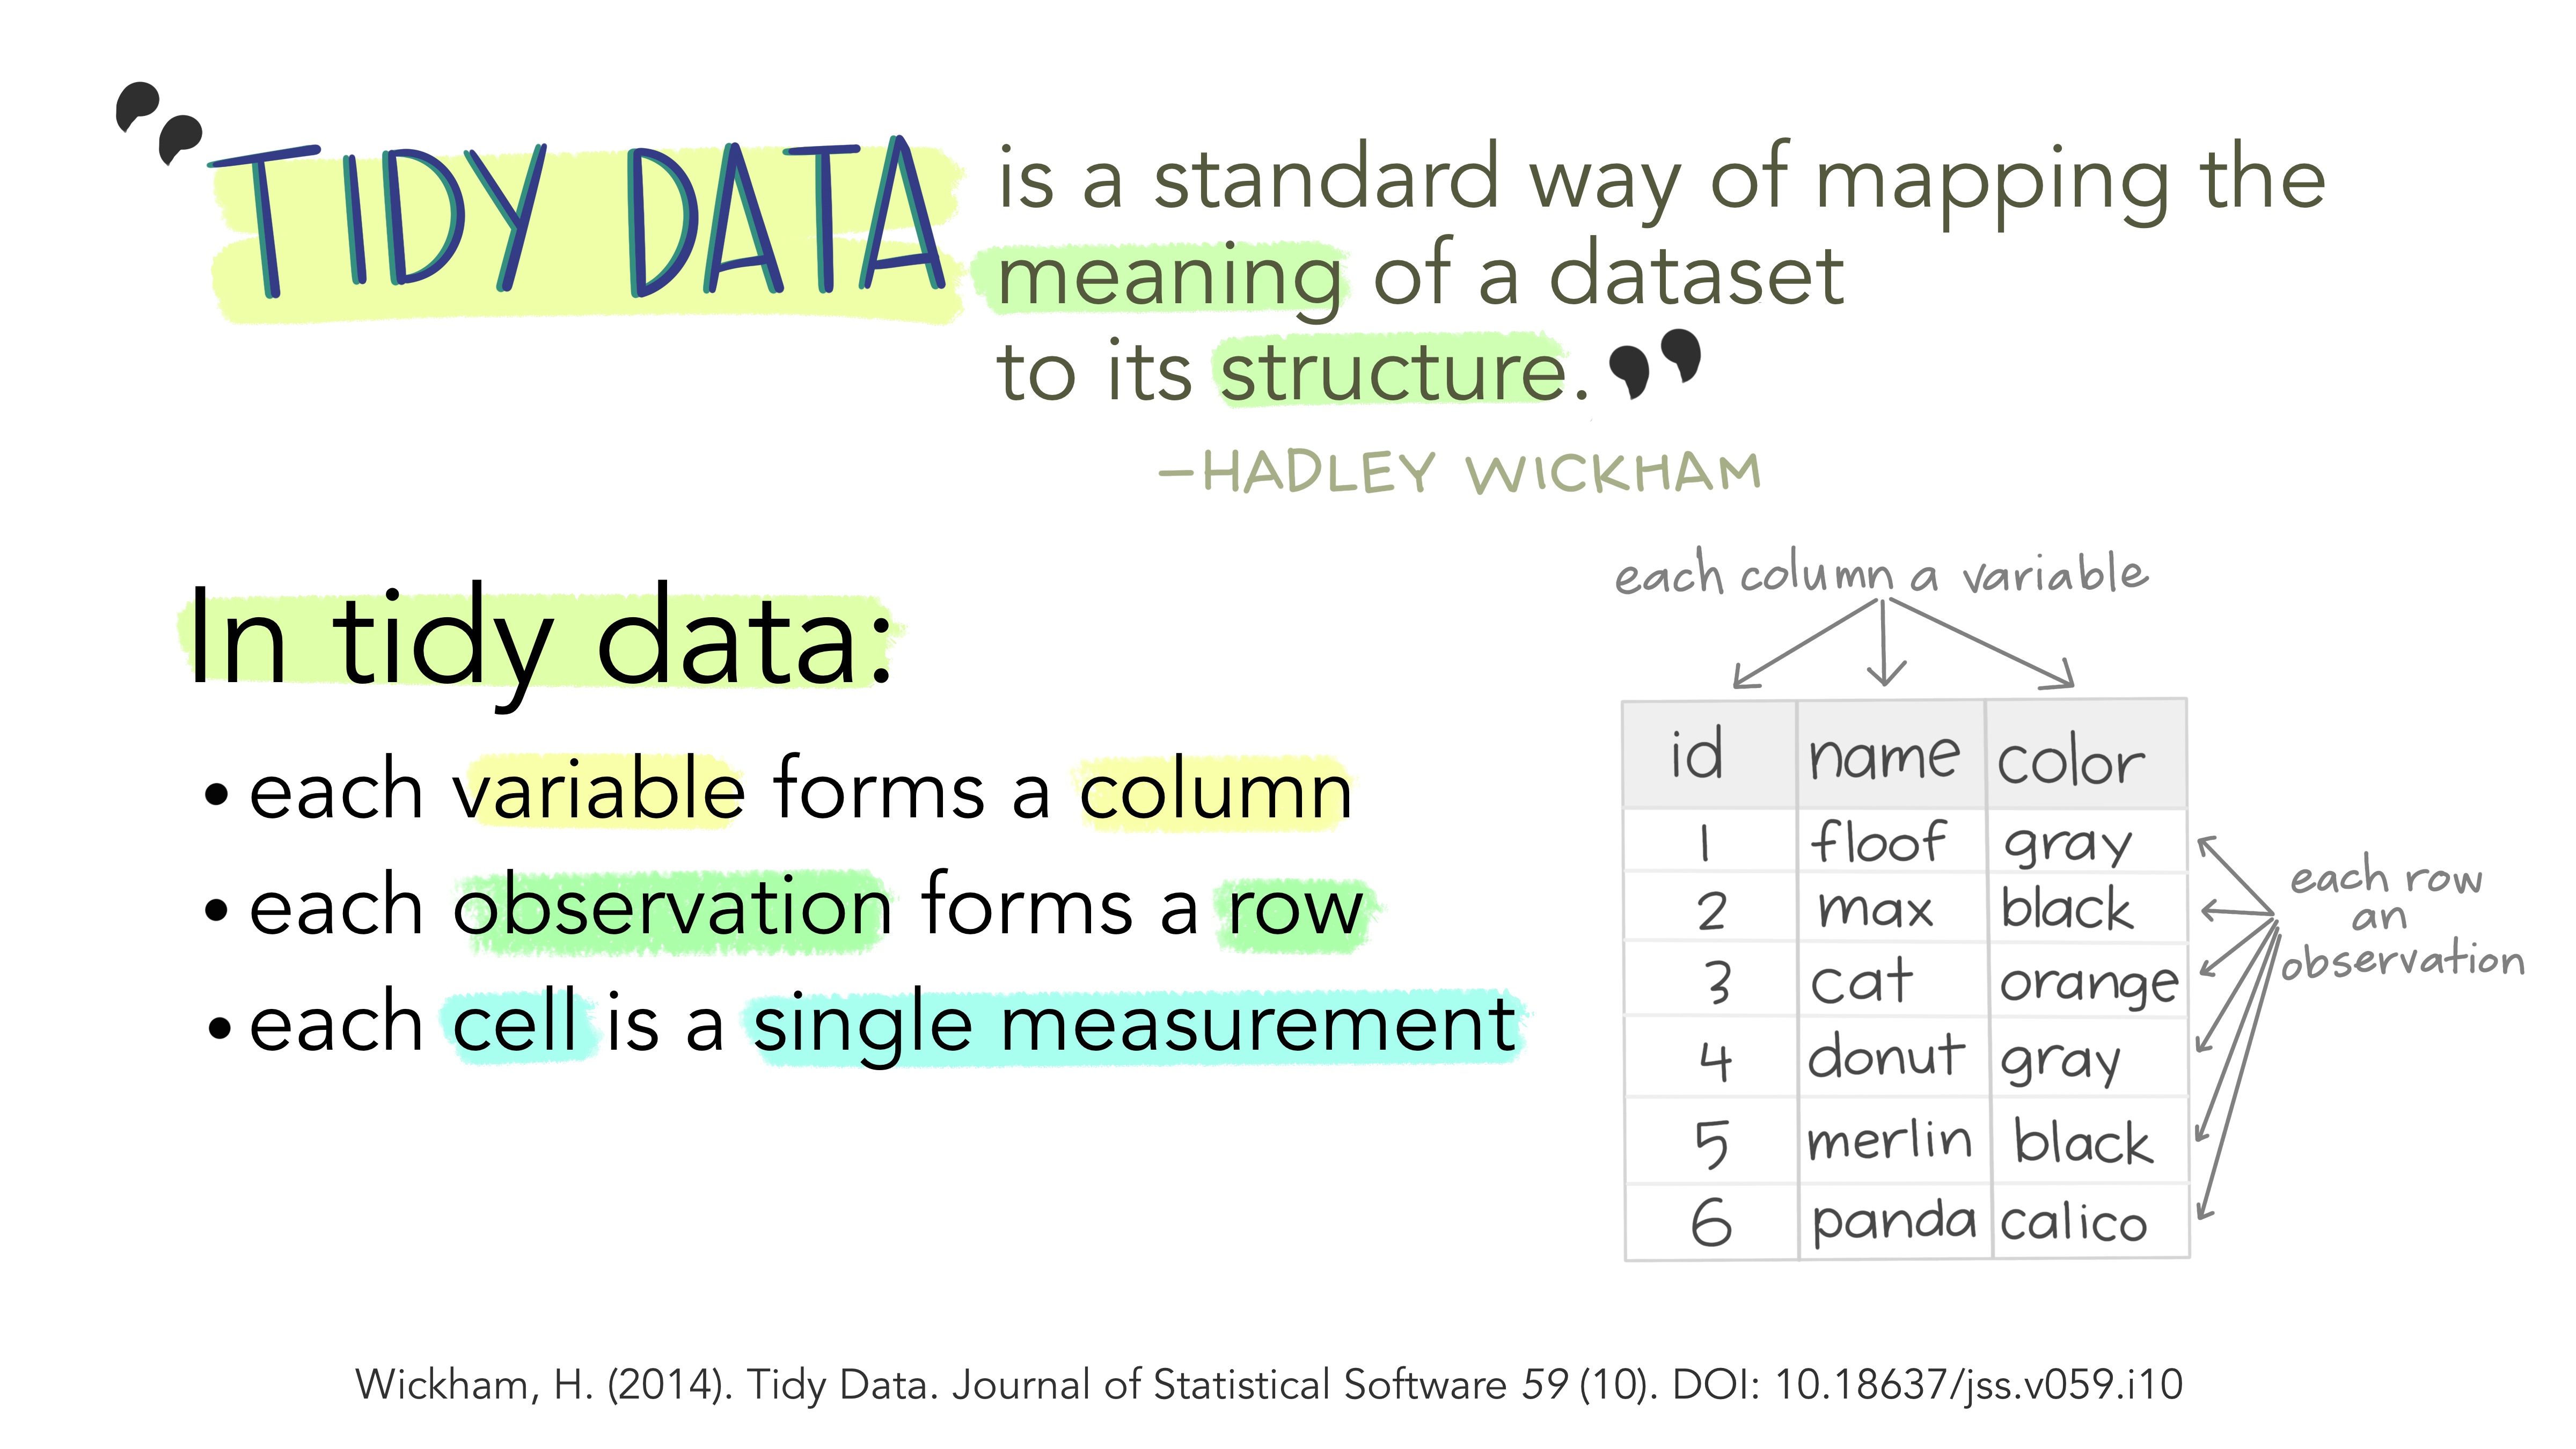 Stylized text providing an overview of Tidy Data. The top reads “Tidy data is a standard way of mapping the meaning of a dataset to its structure. - Hadley Wickham.” On the left reads “In tidy data: each variable forms a column; each observation forms a row; each cell is a single measurement.” There is an example table on the lower right with columns ‘id’, ‘name’ and ‘color’ with observations for different cats, illustrating tidy data structure.